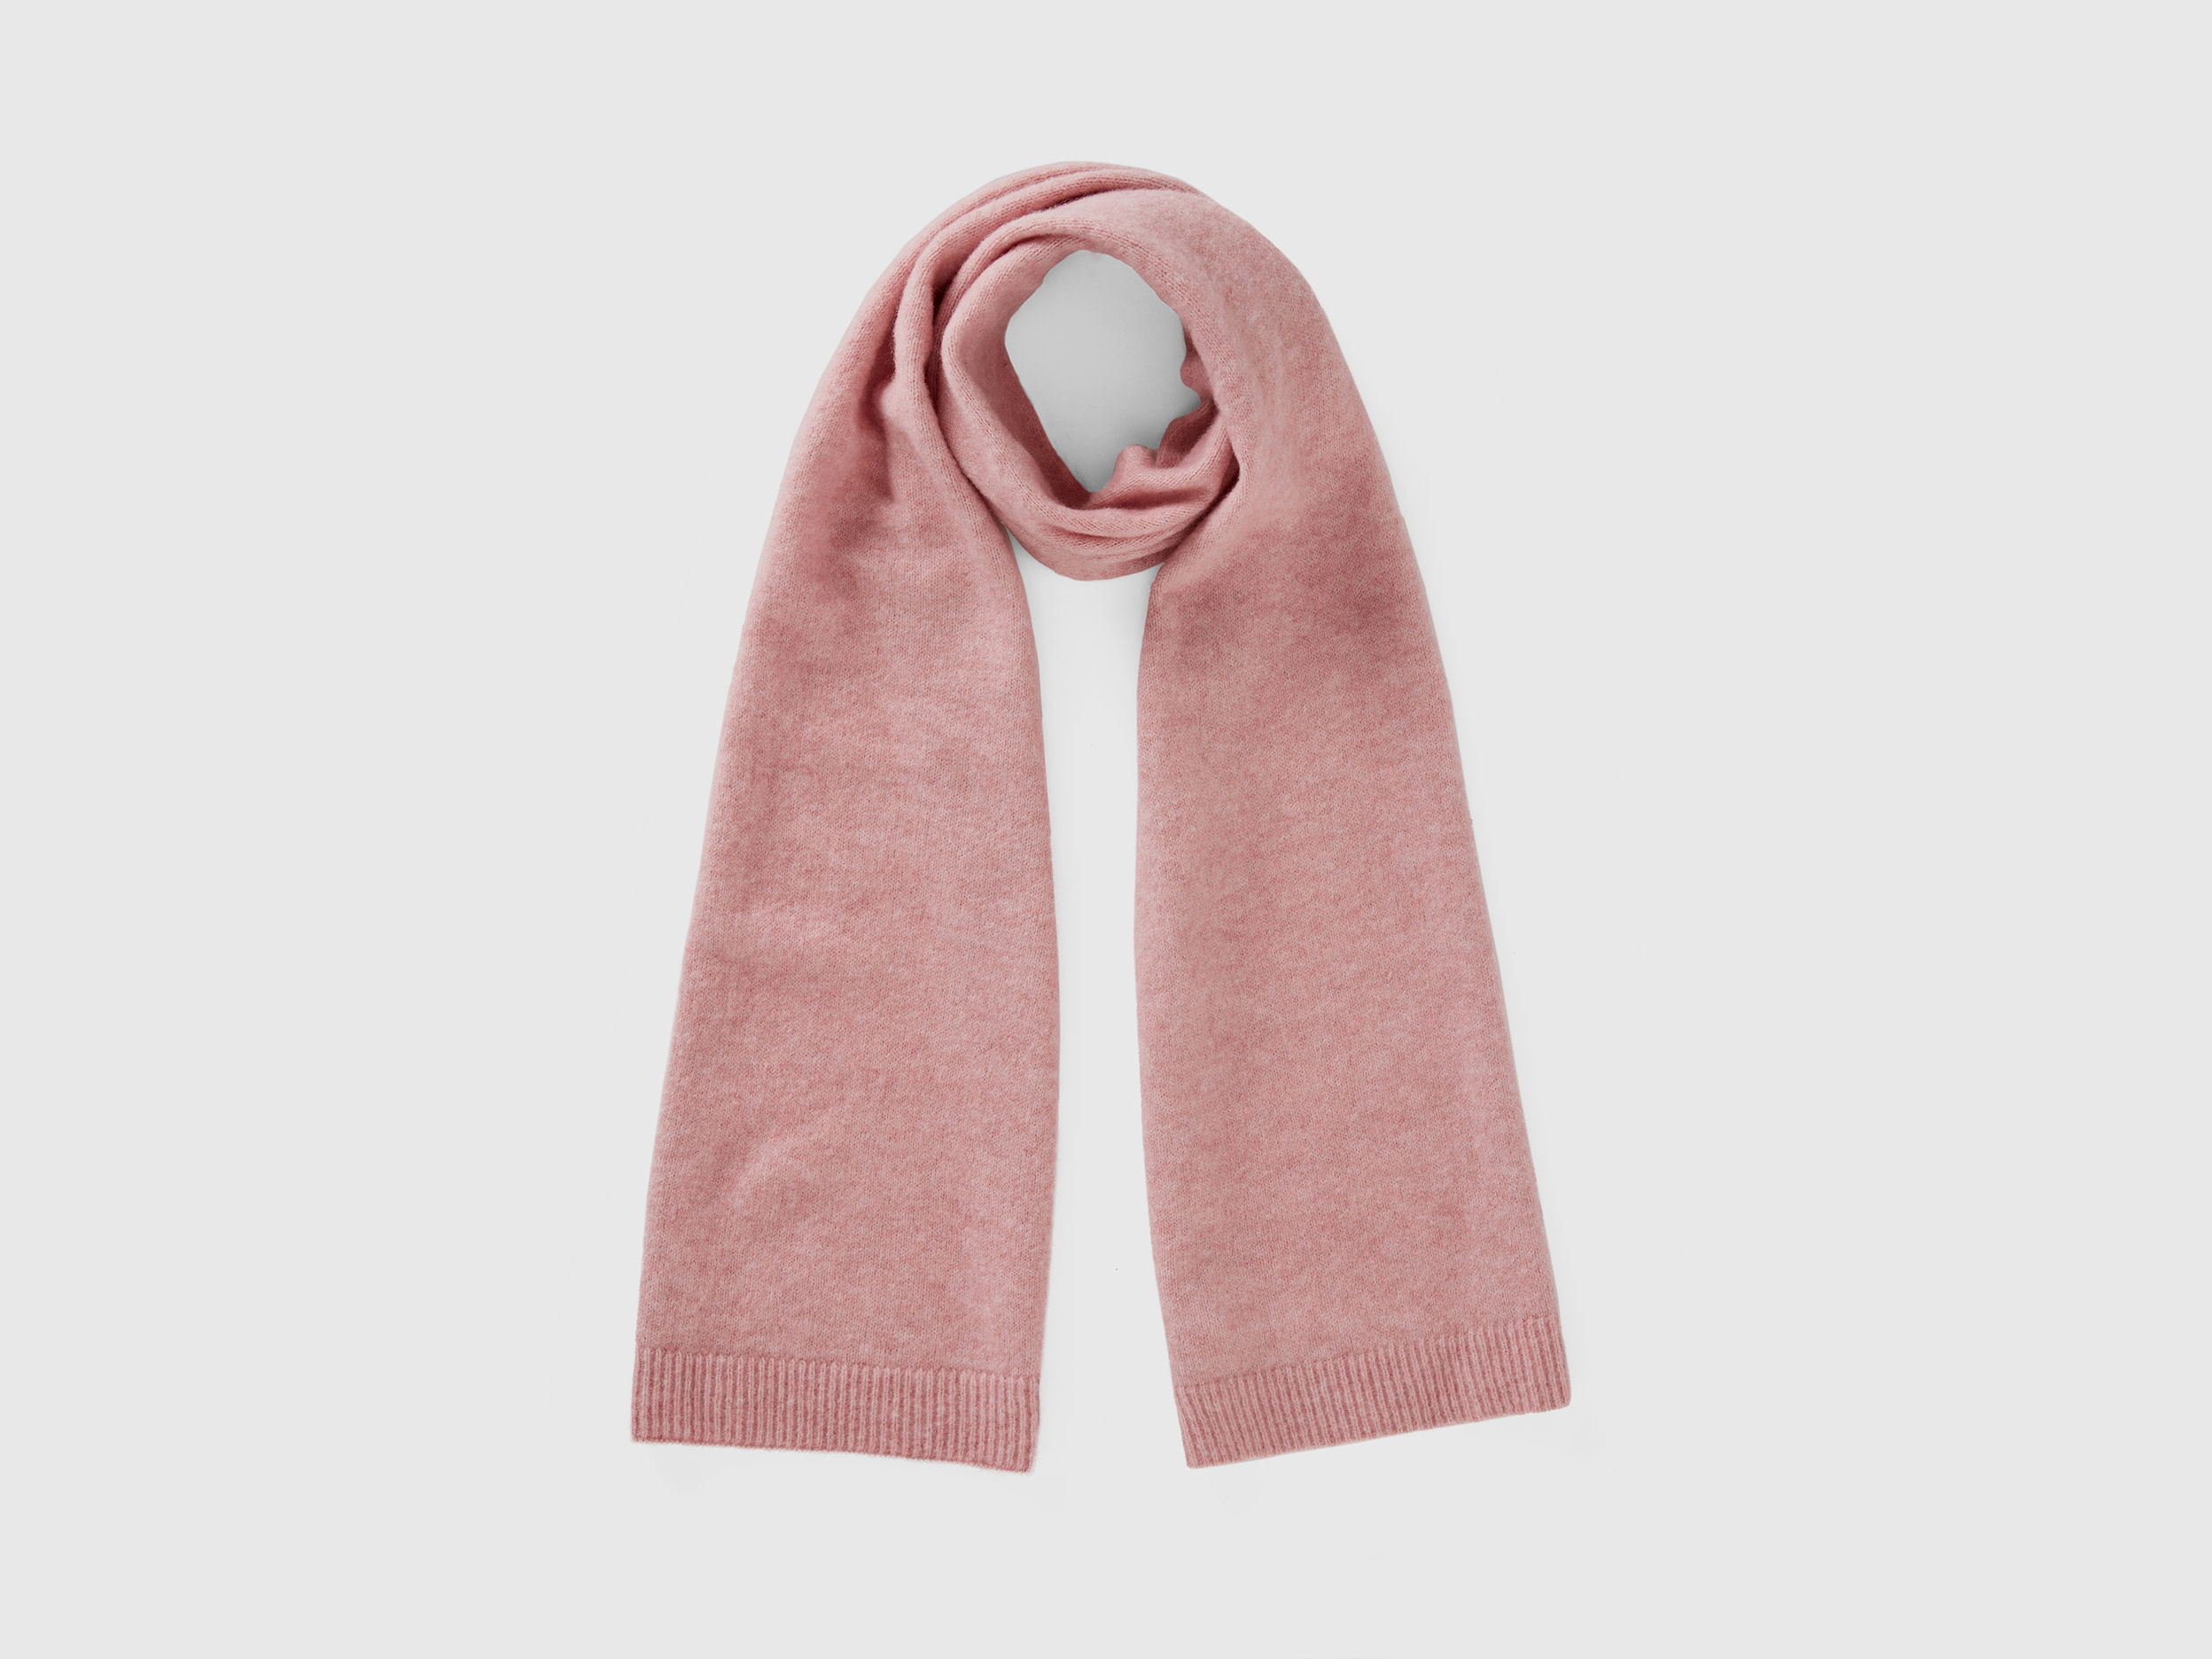 Benetton, Scarf In Recycled Yarn, size OS, Soft Pink, Women